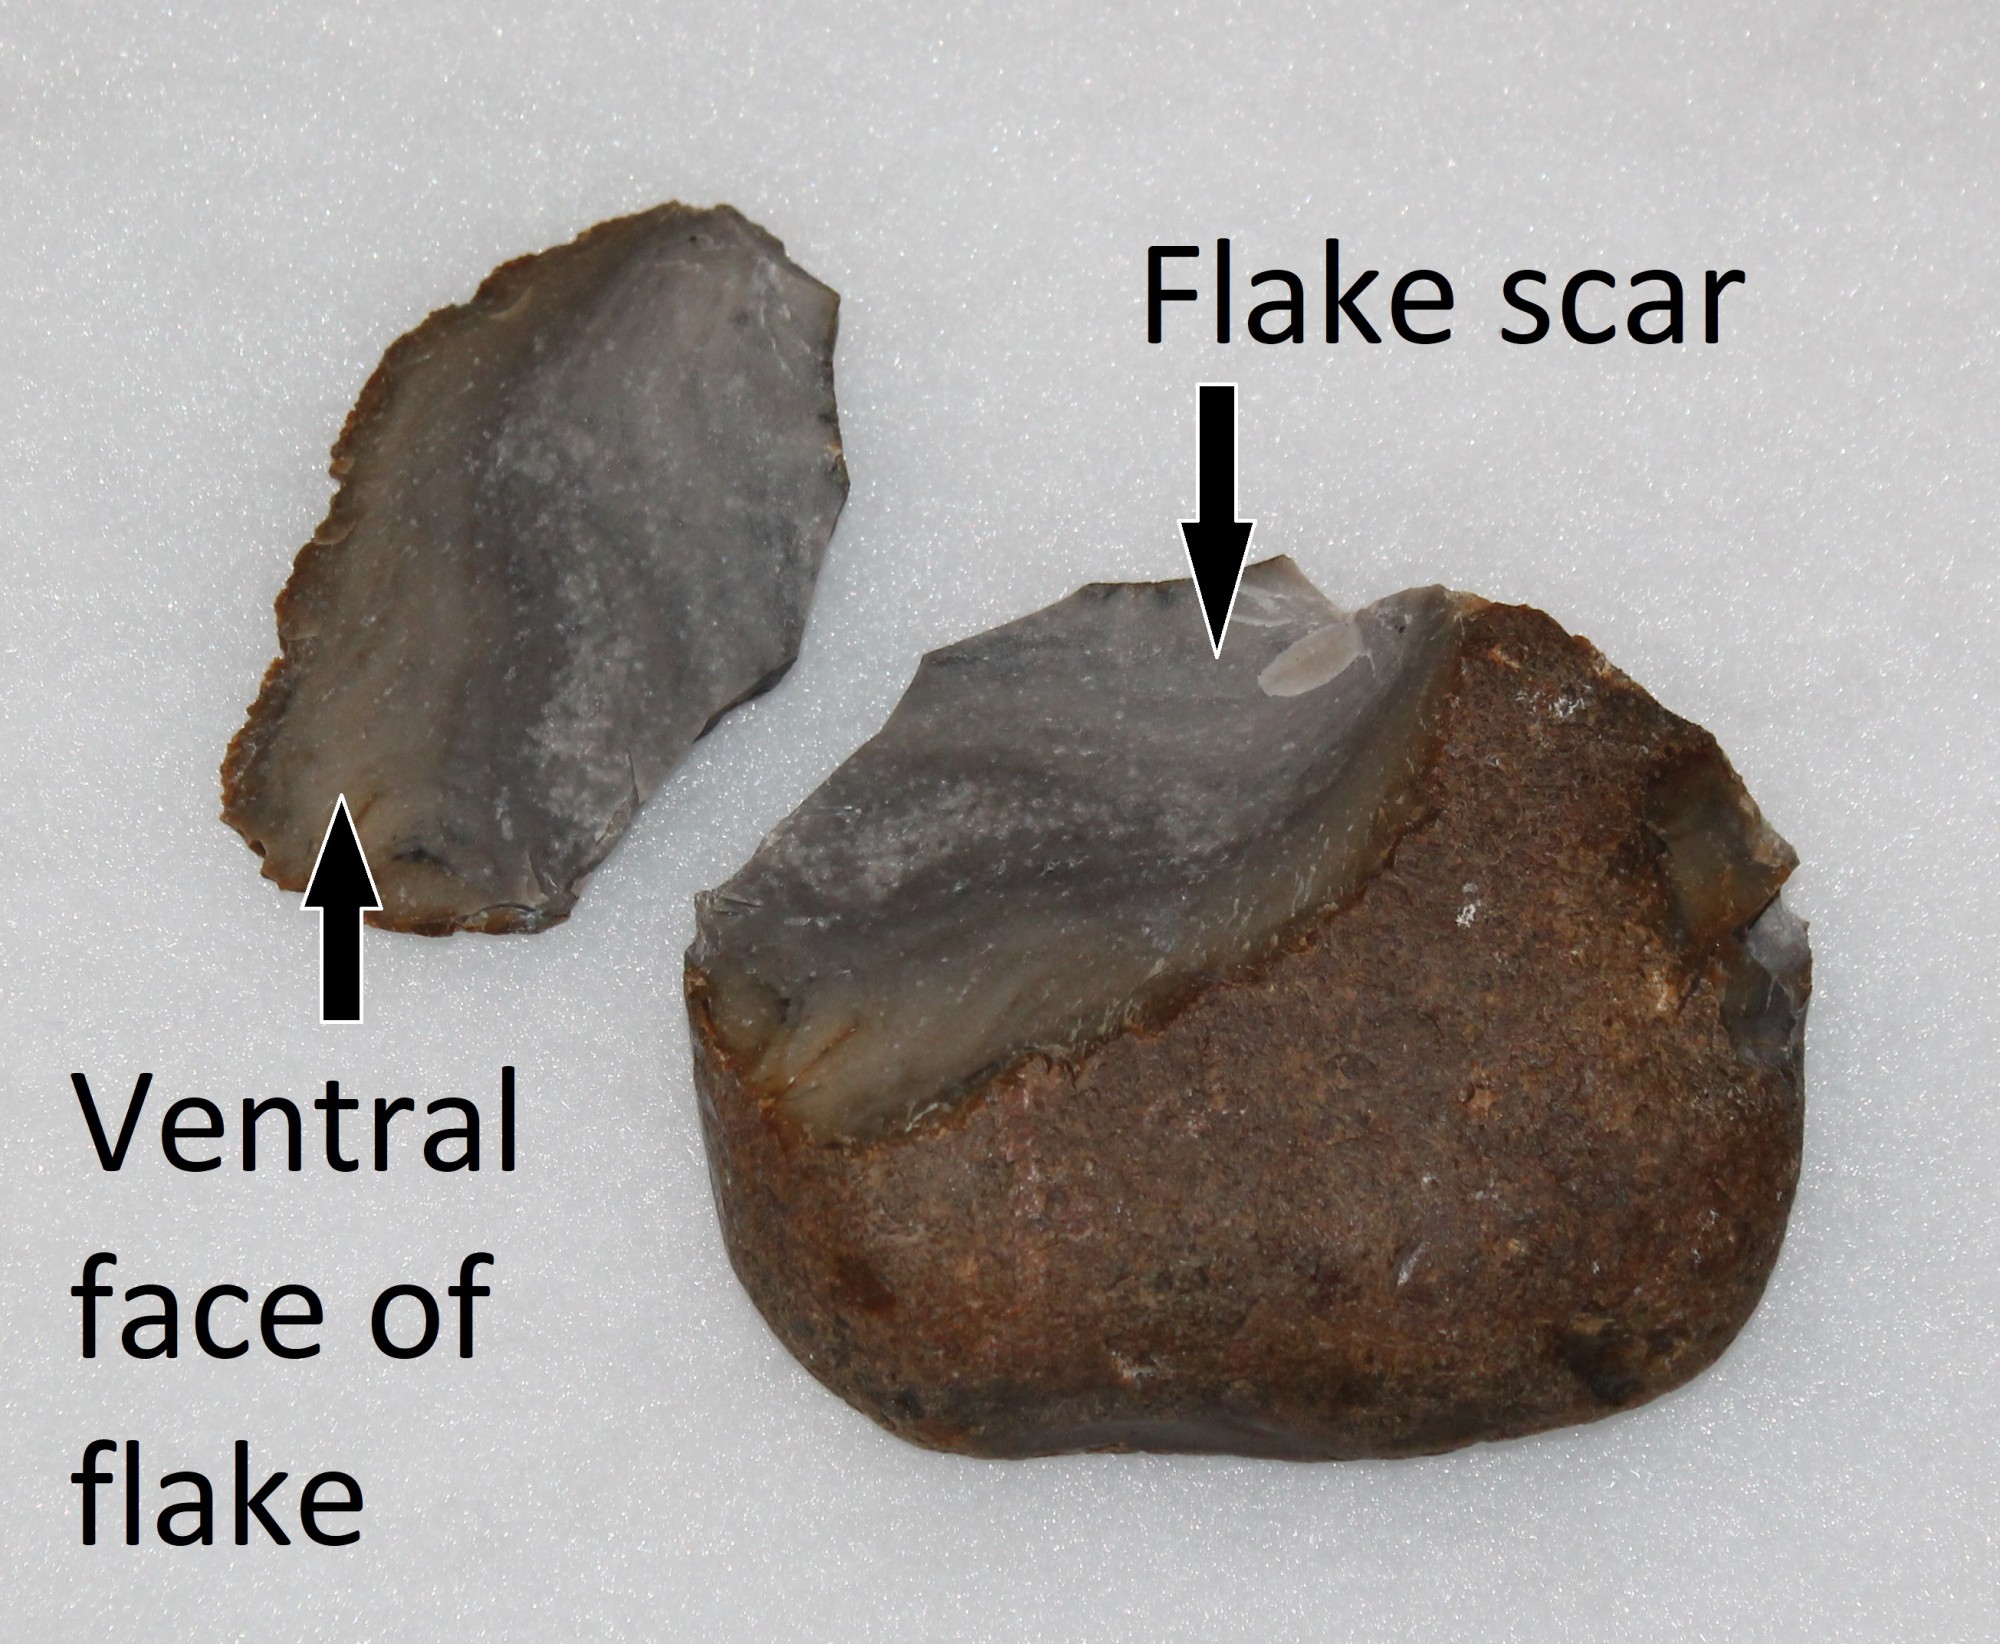 Ventral face of flake